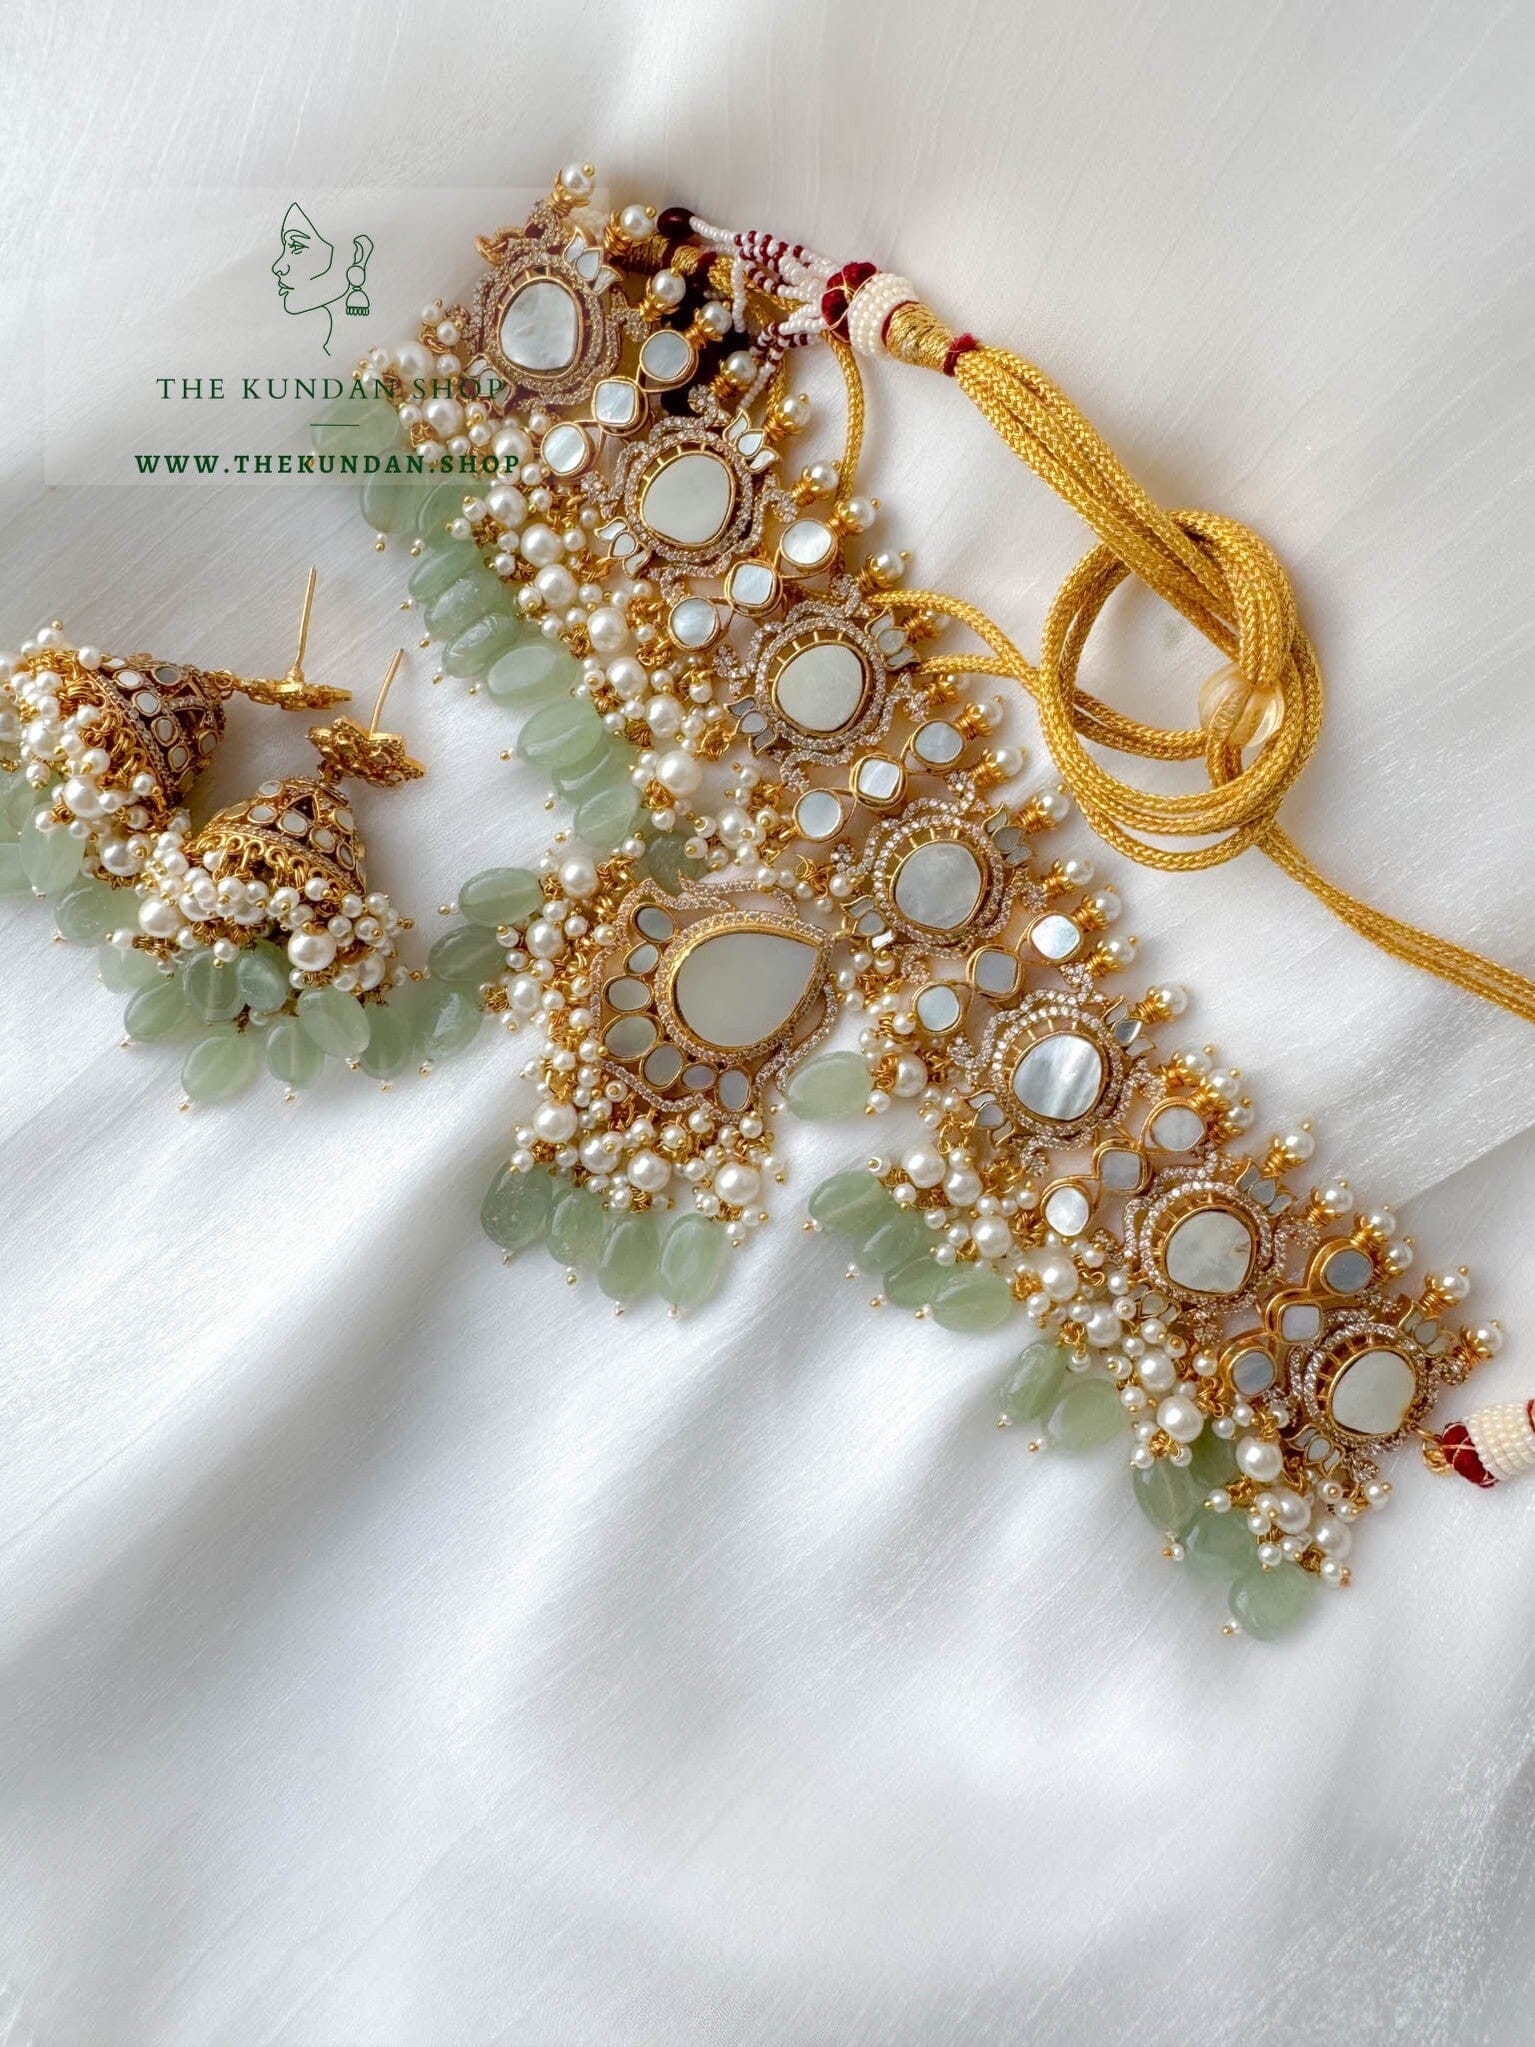 Adoring Mint in Mother Of Pearl Necklace Sets THE KUNDAN SHOP 